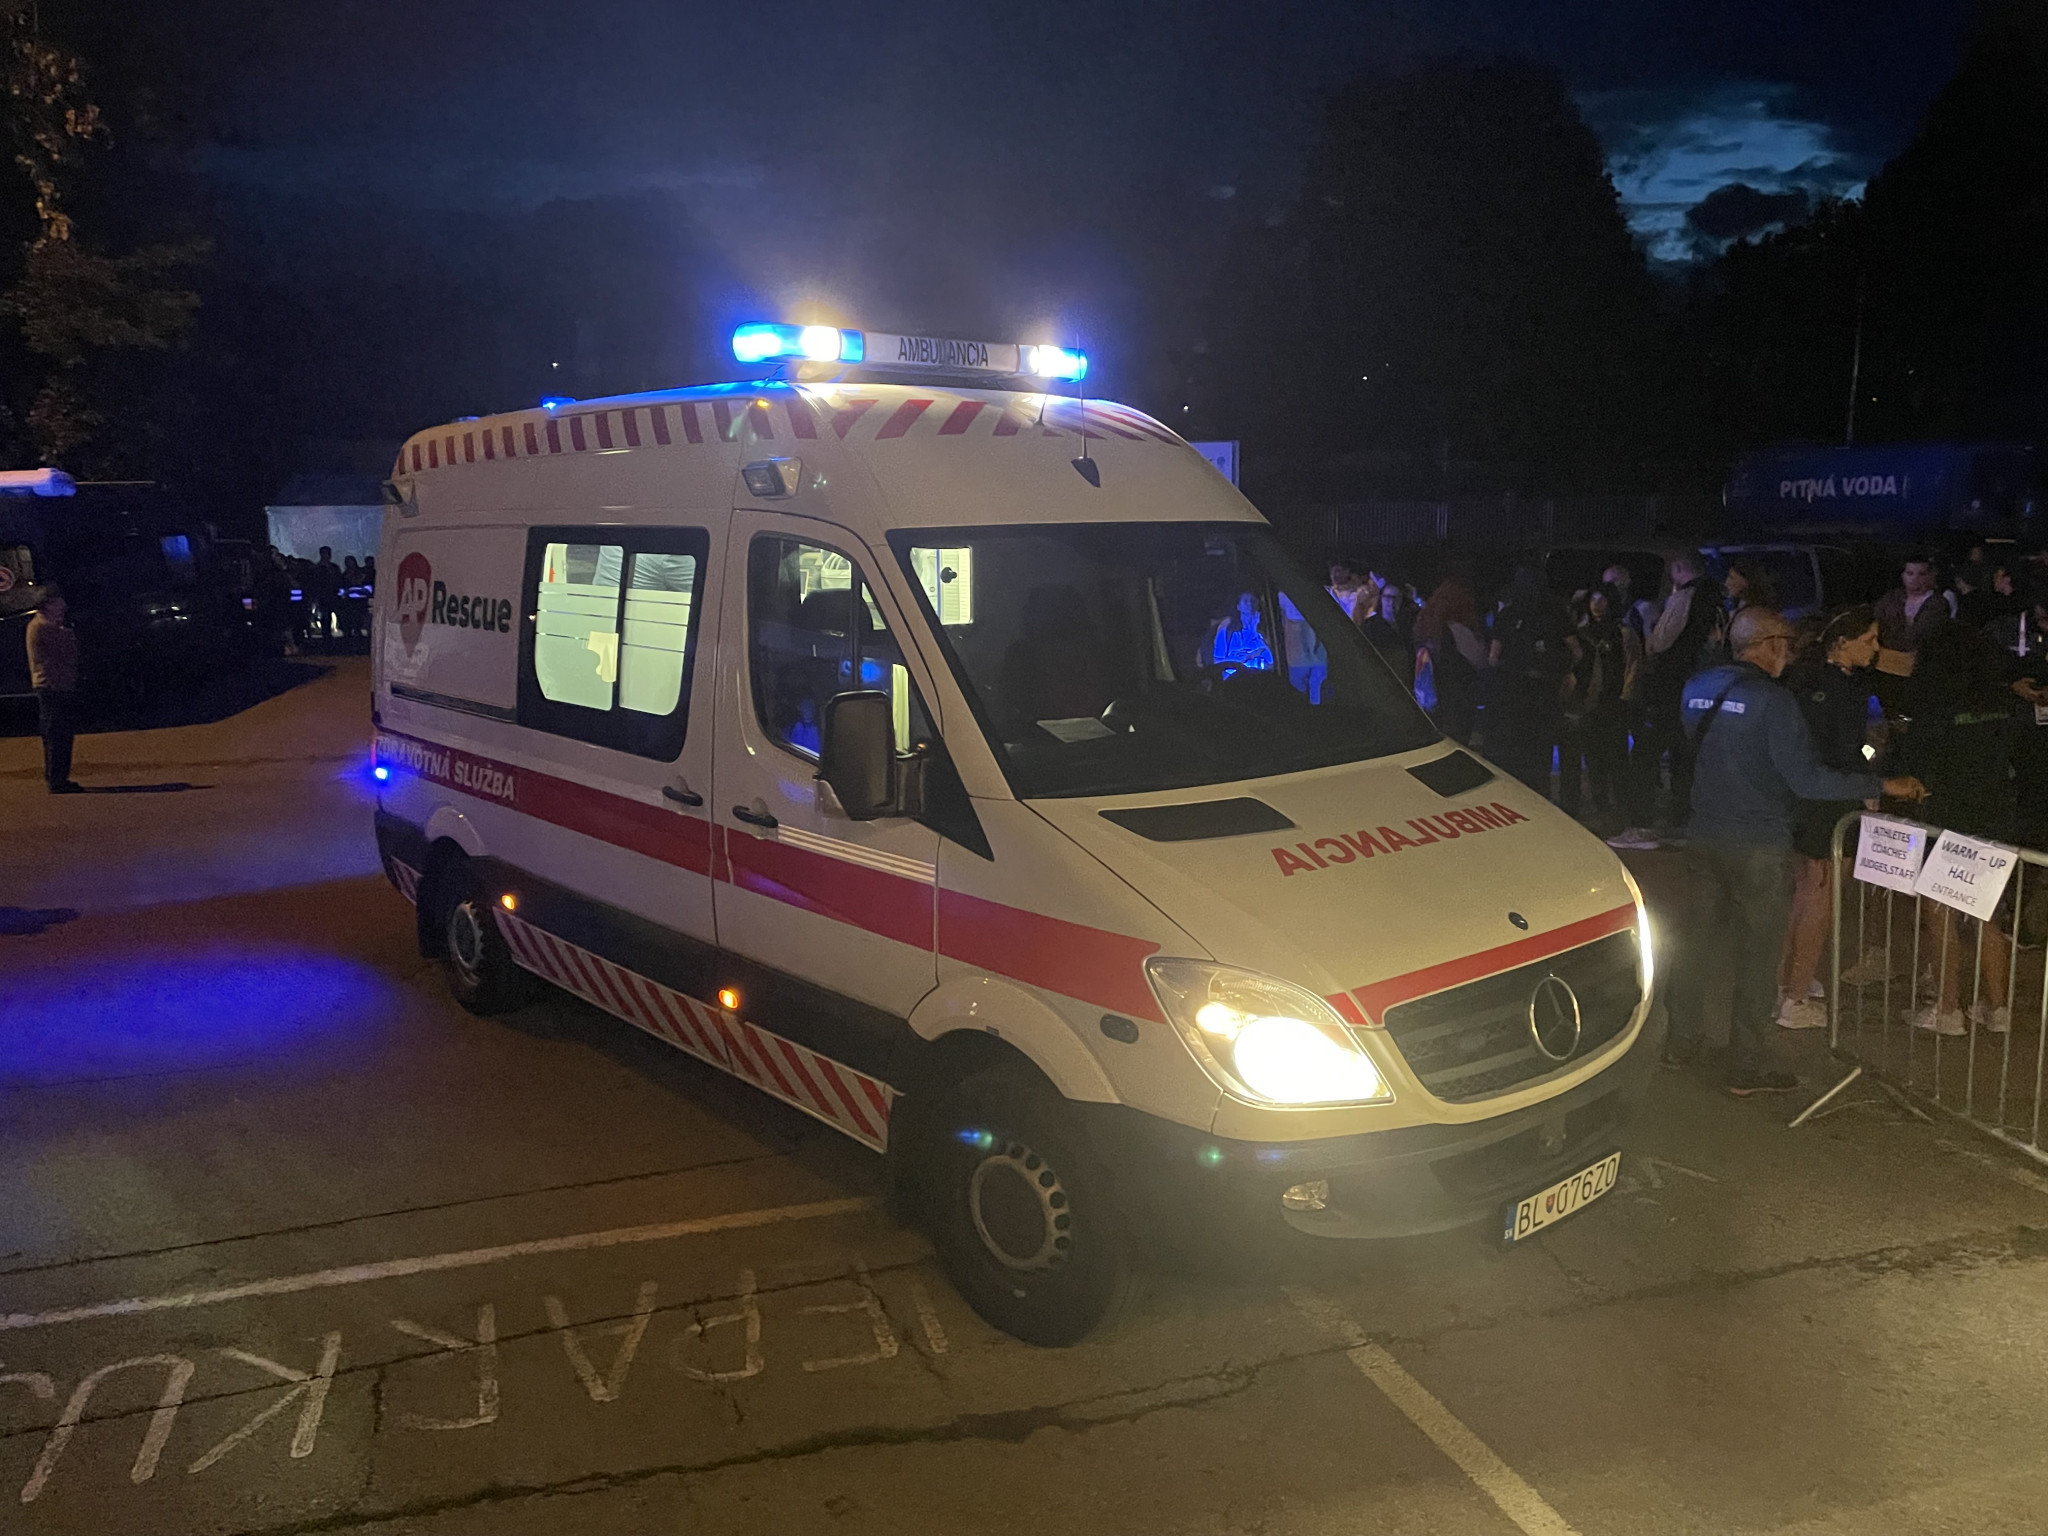 An ambulance was on hand to escort Smiltė Plytnykaitė away from the venue after she fainted ©ITG